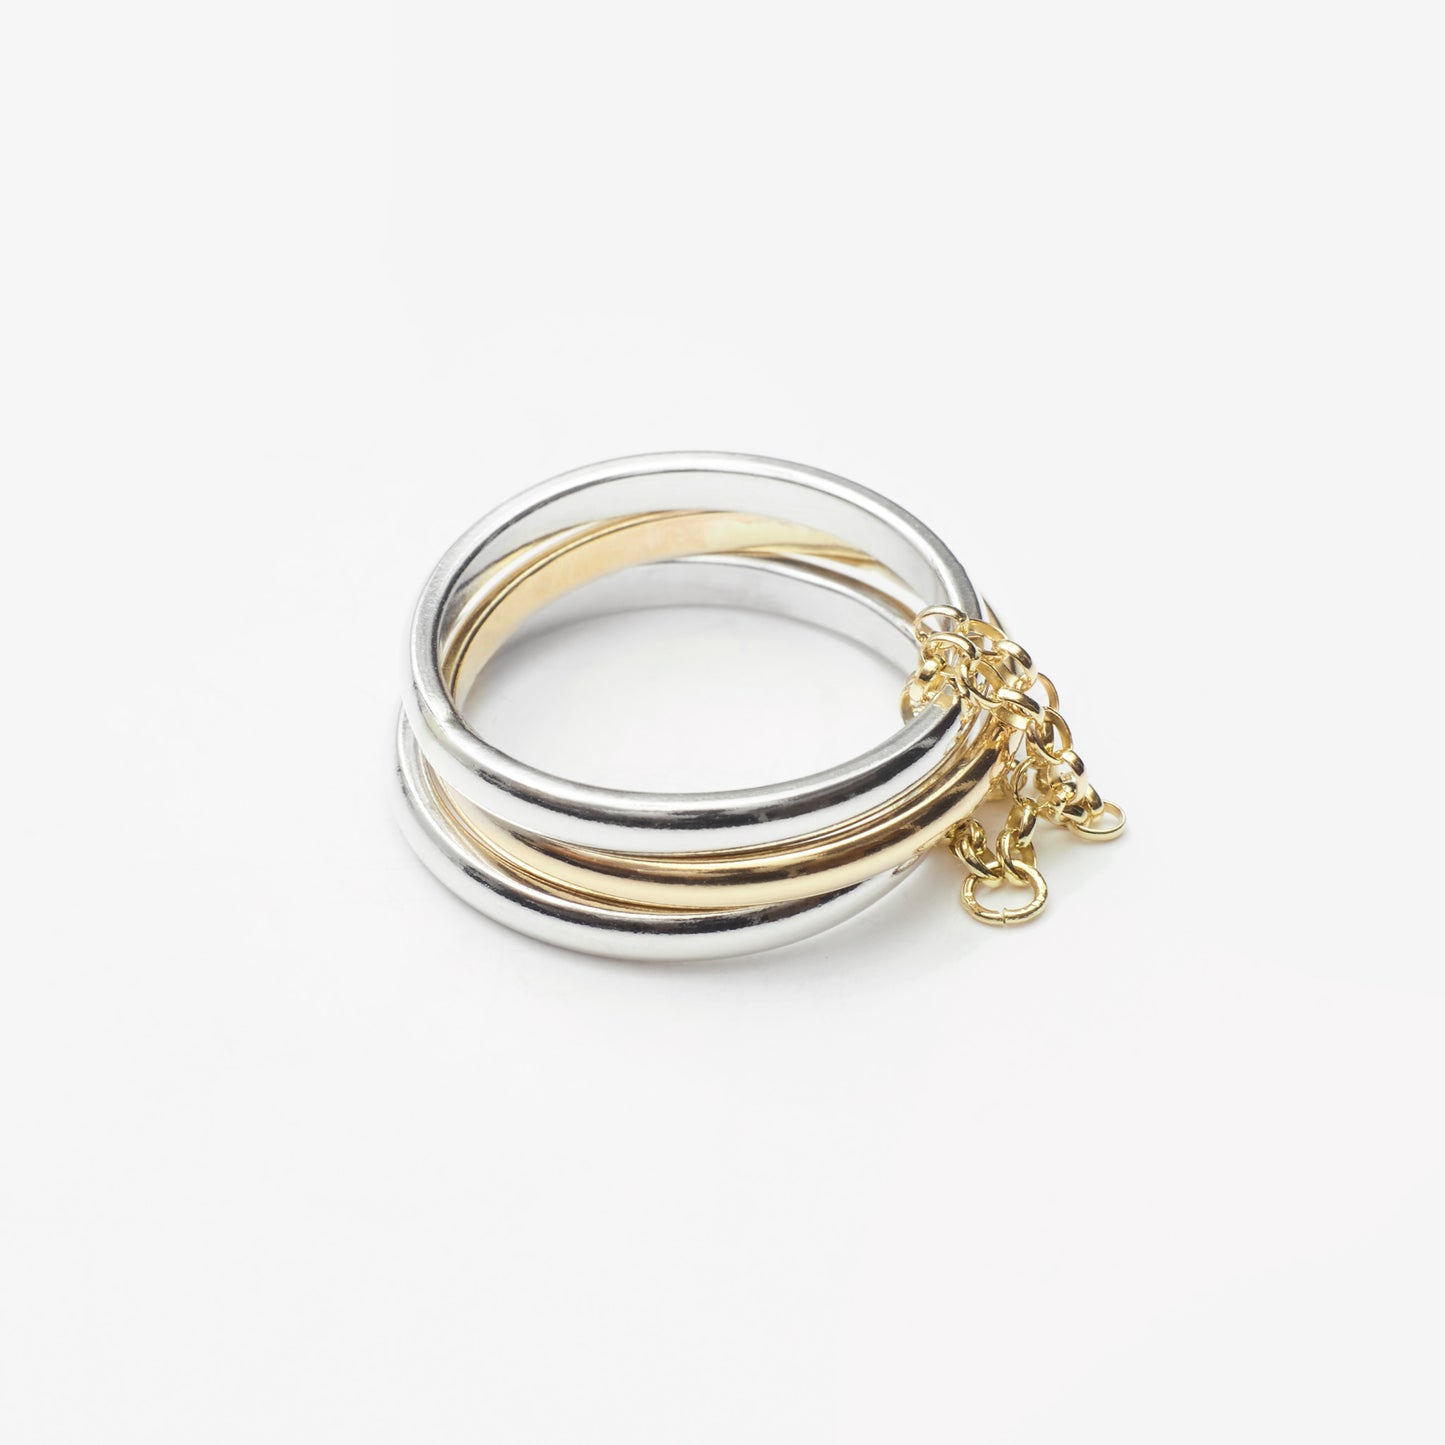 Trio Ring - 9kt Gold & Sterling Silver